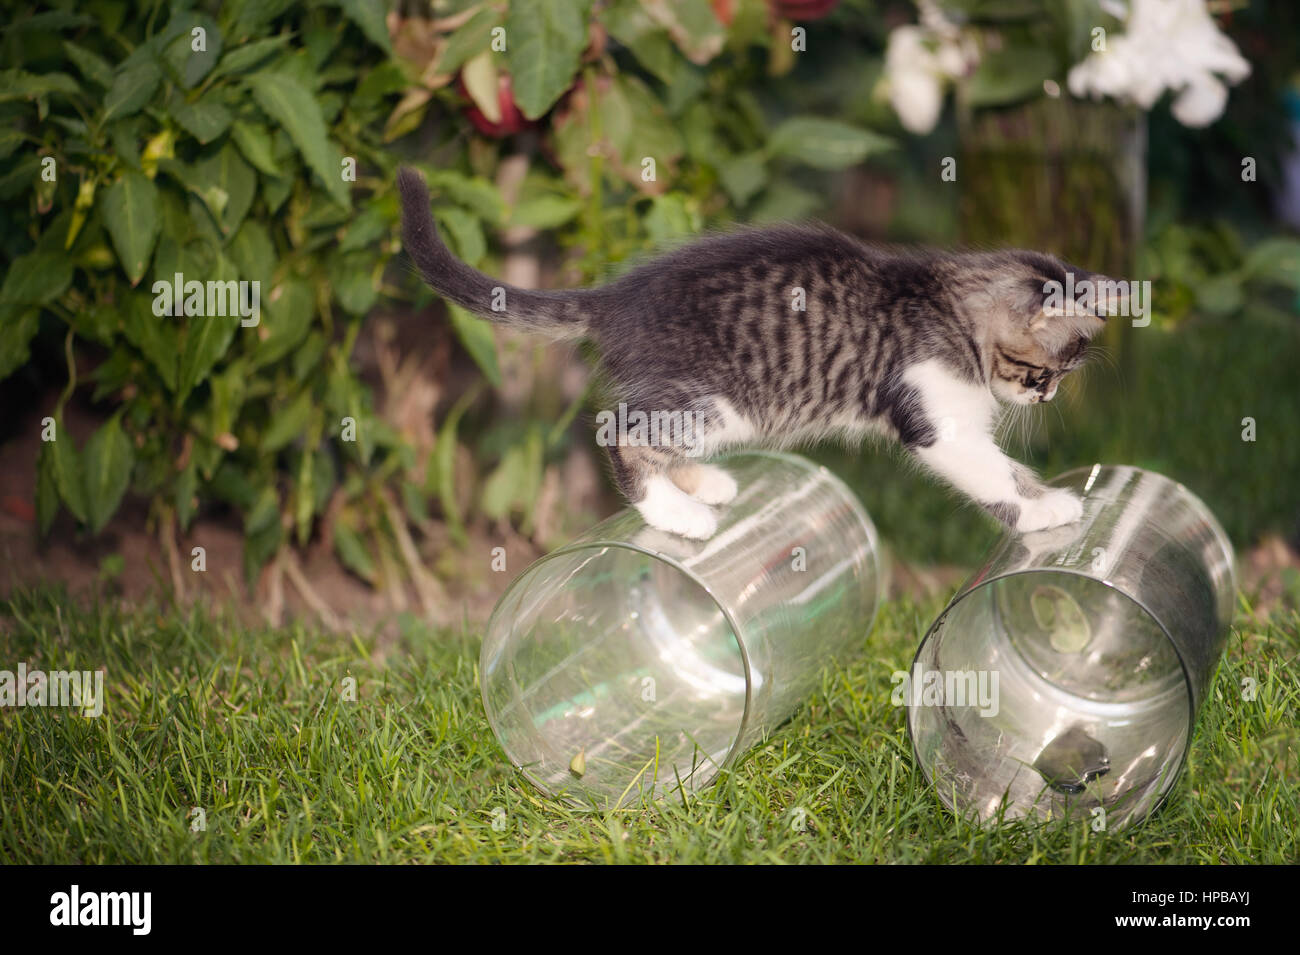 Tabby kitten playing with glass vases in the garden Stock Photo